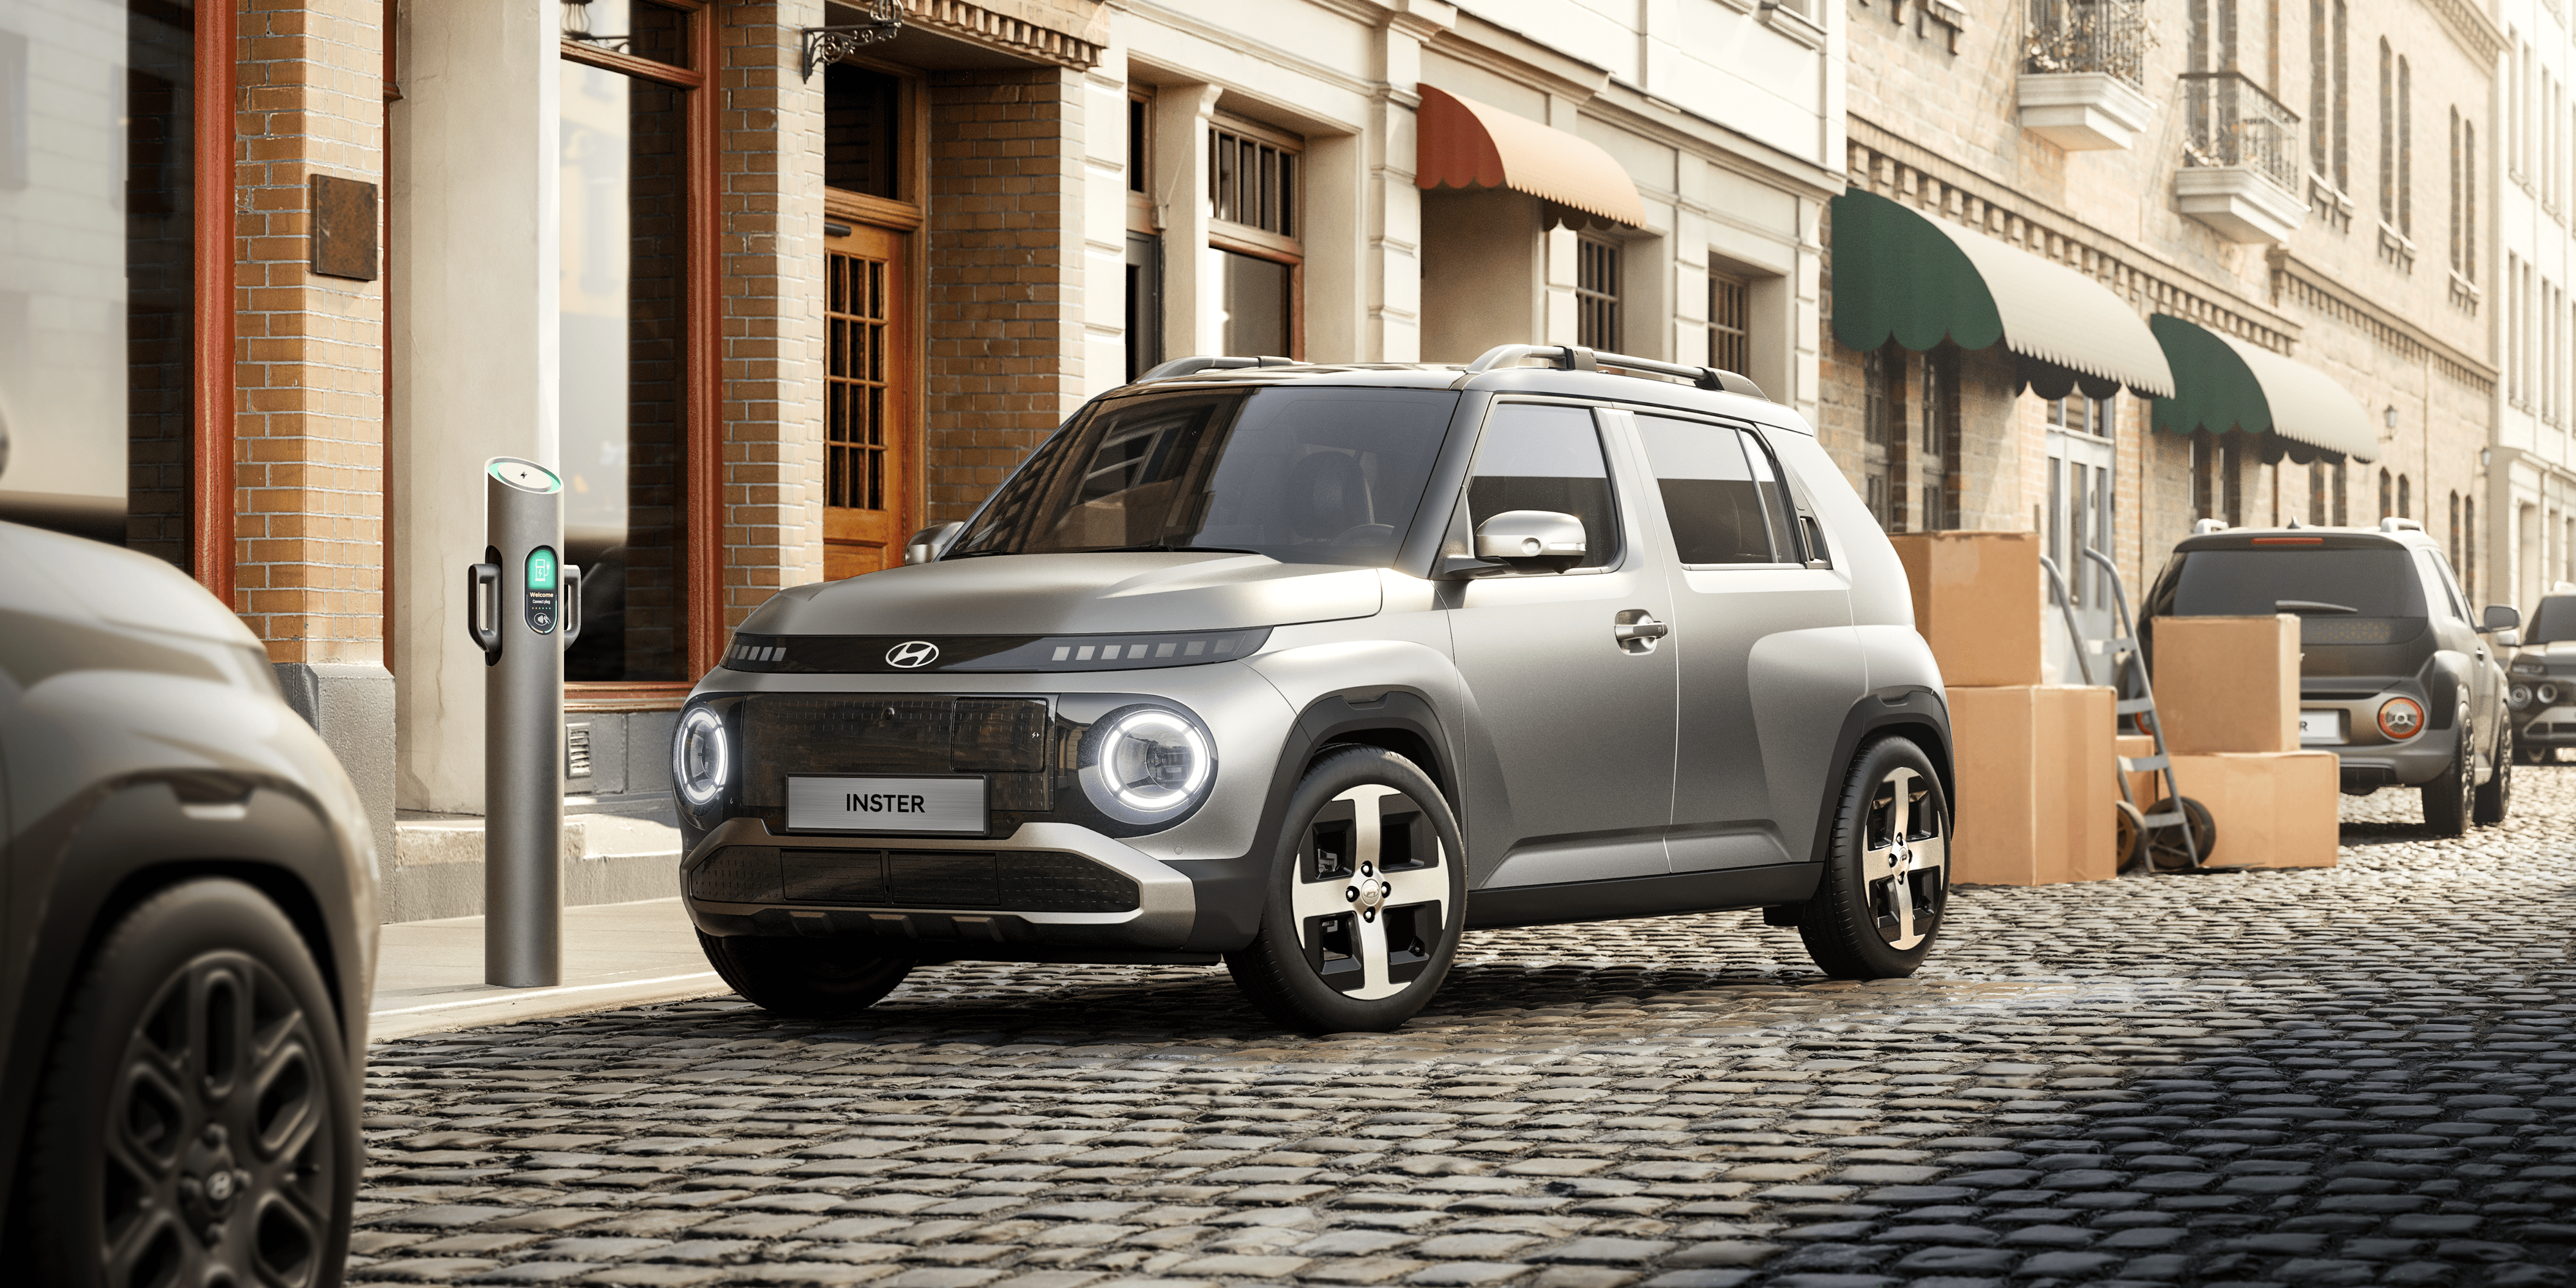 Hyundai Inster EV Is Here, Offers 355 KM Of Range